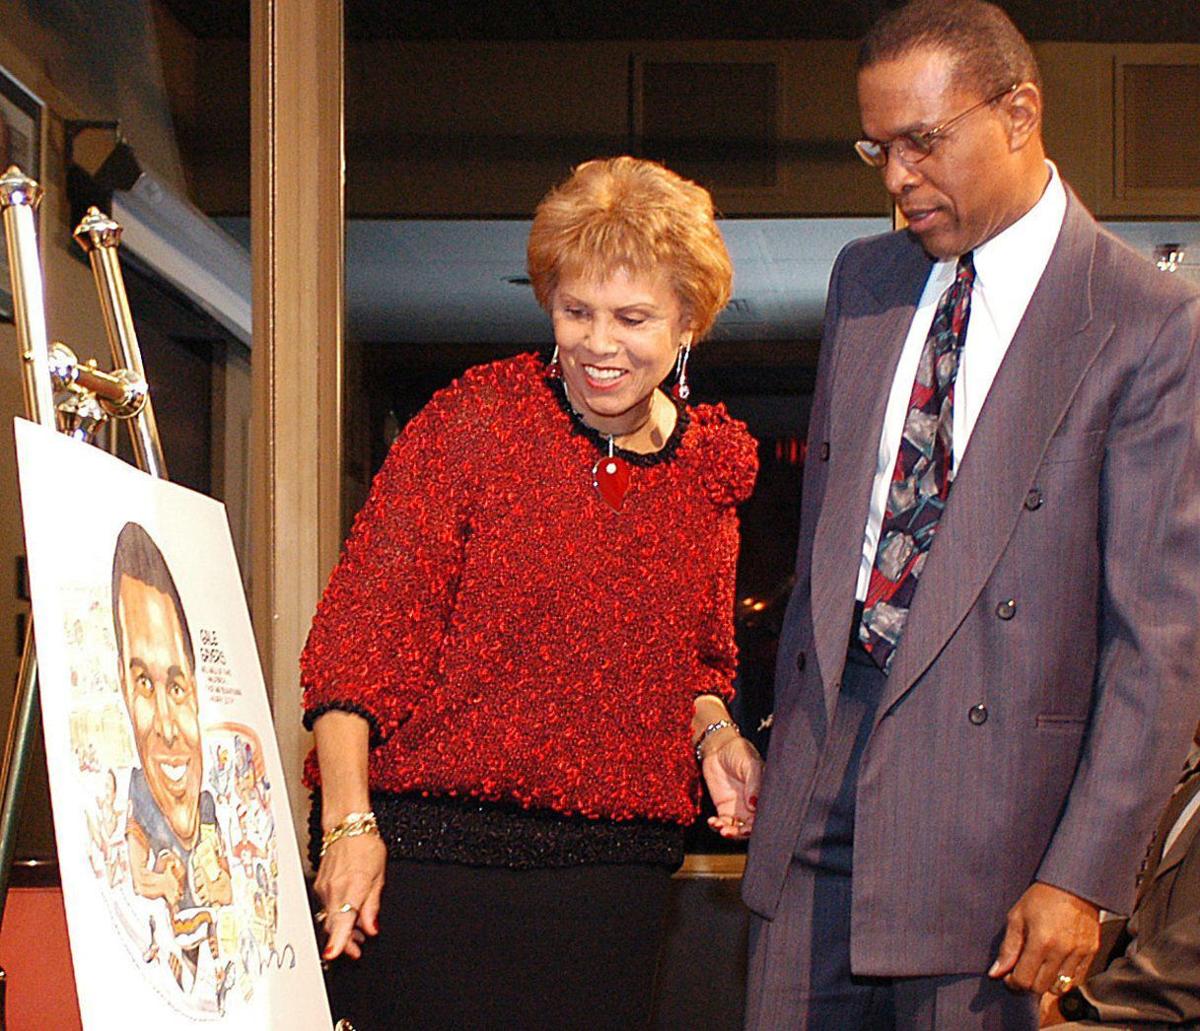 Gale Sayers' widow thankful for outpouring of support; 'It has really blown  me away'